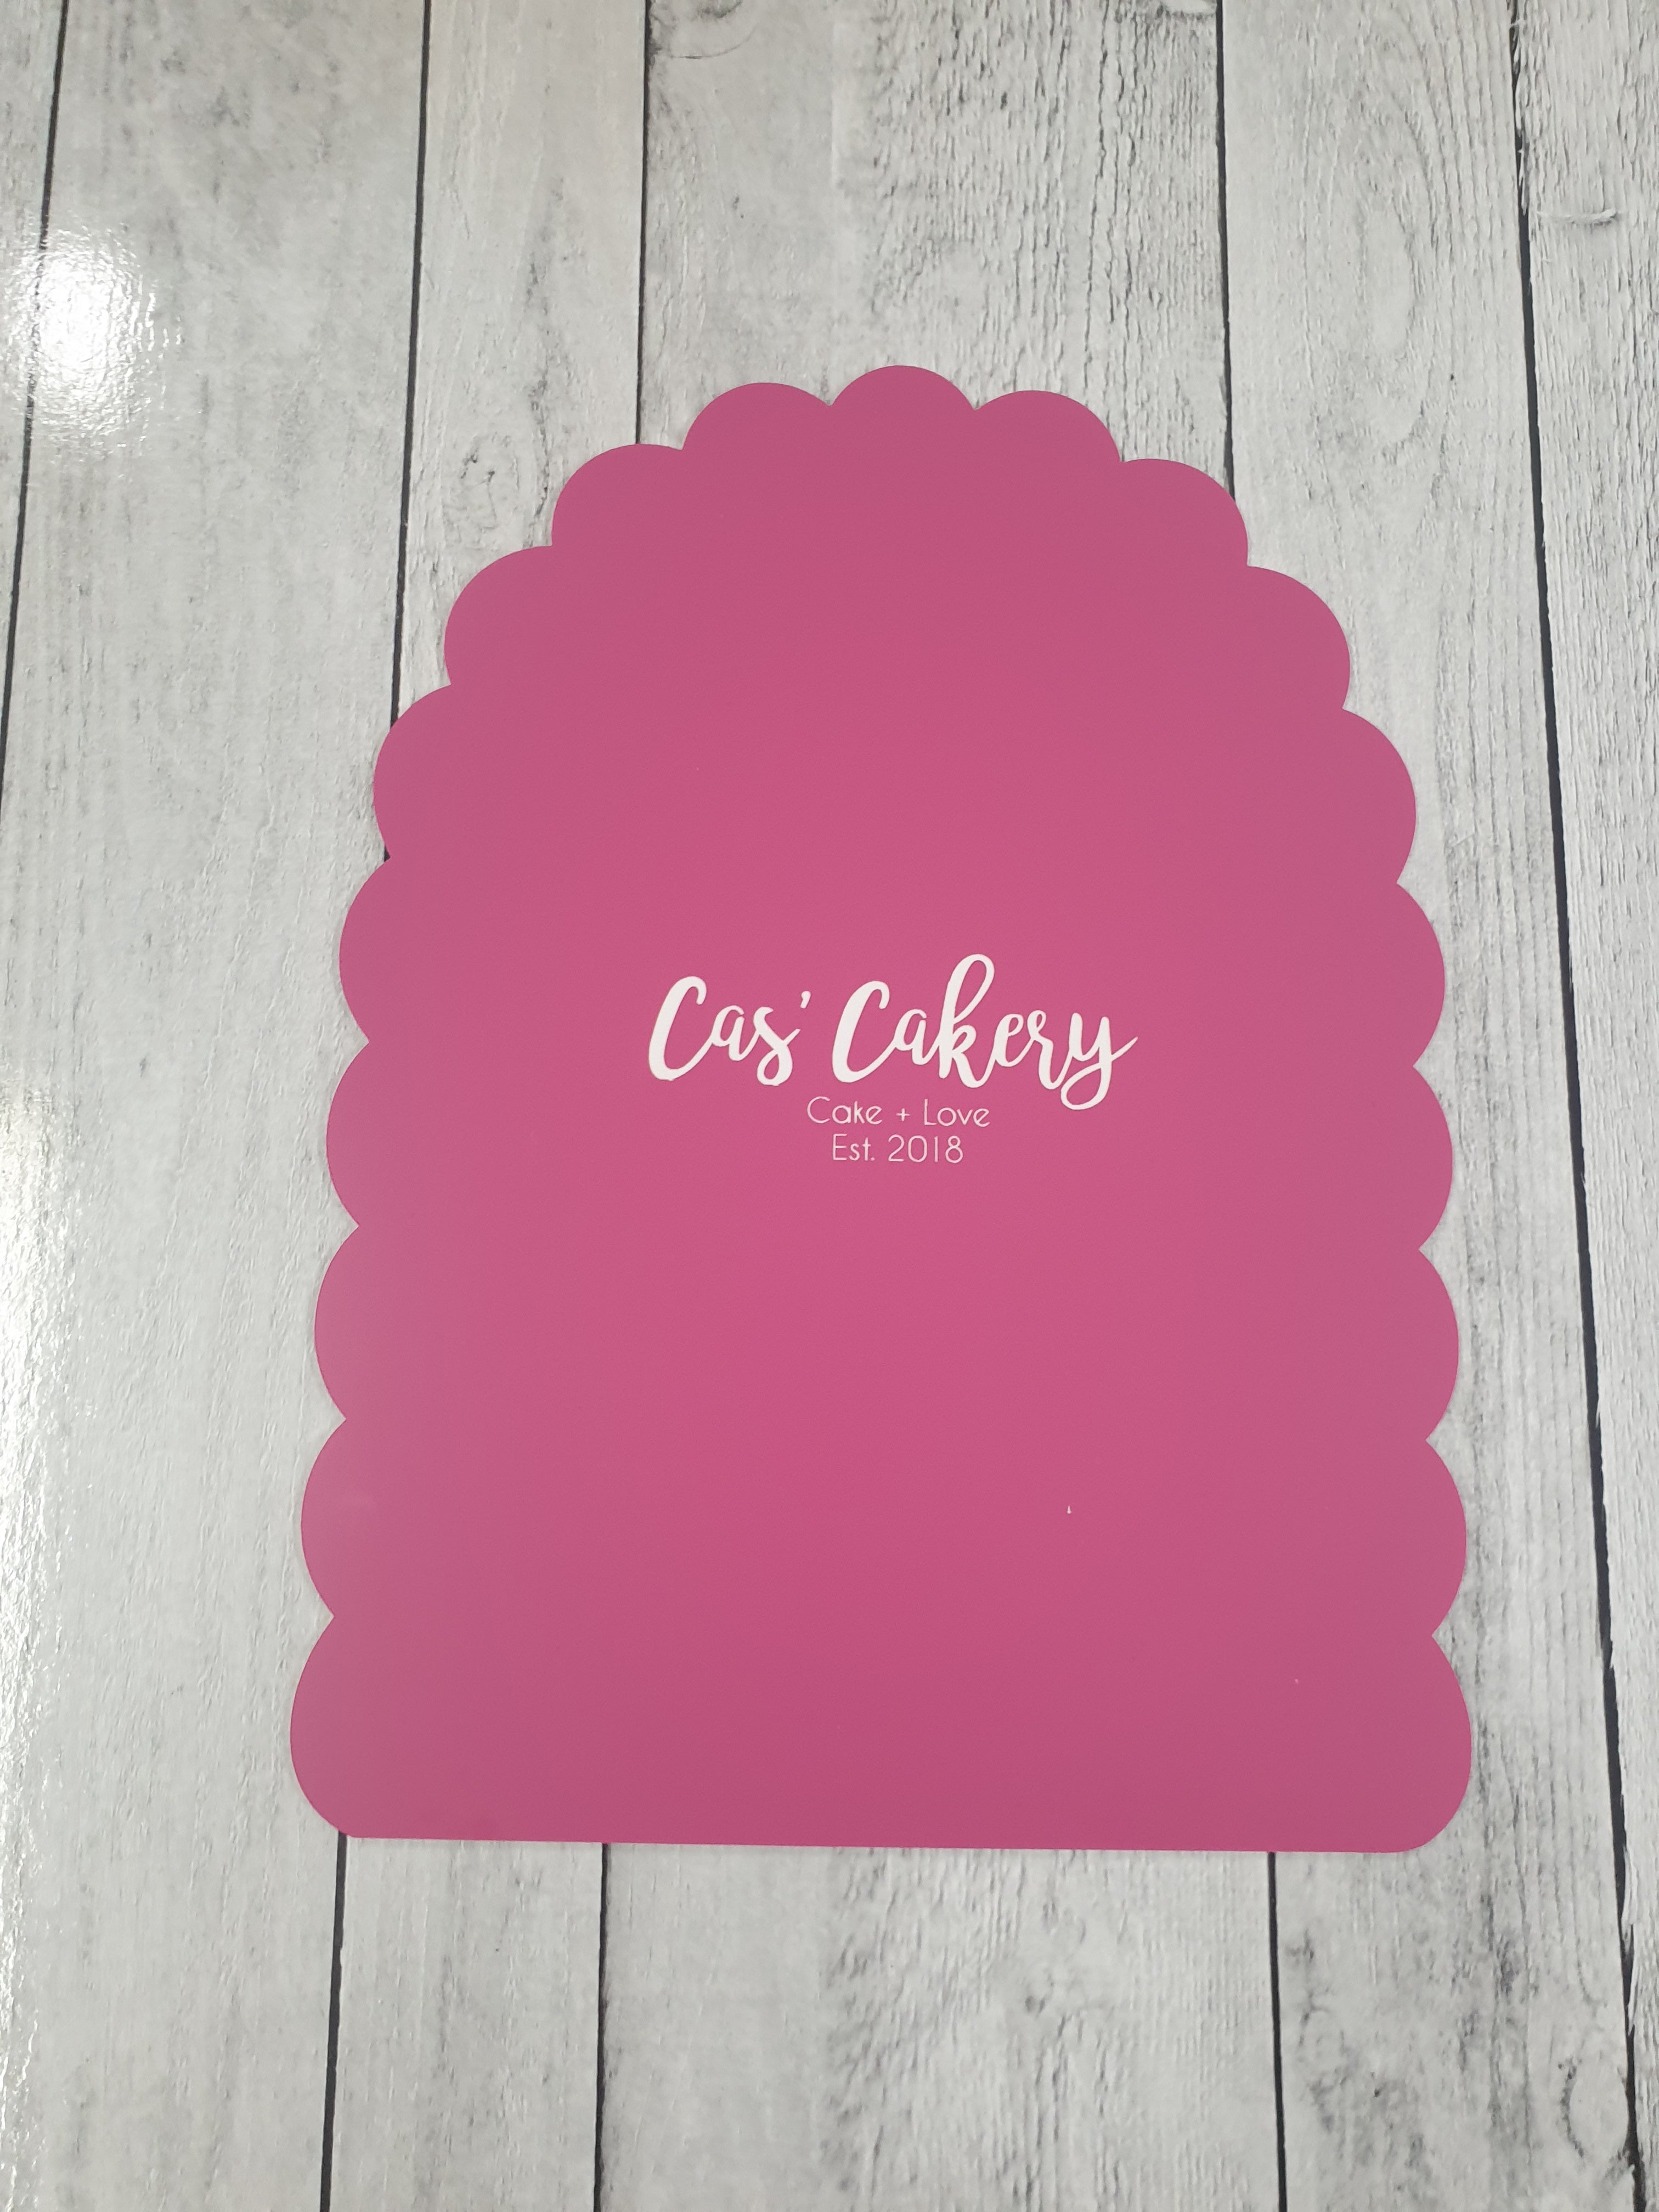 Cas' Cakery Scallop Arch Guides